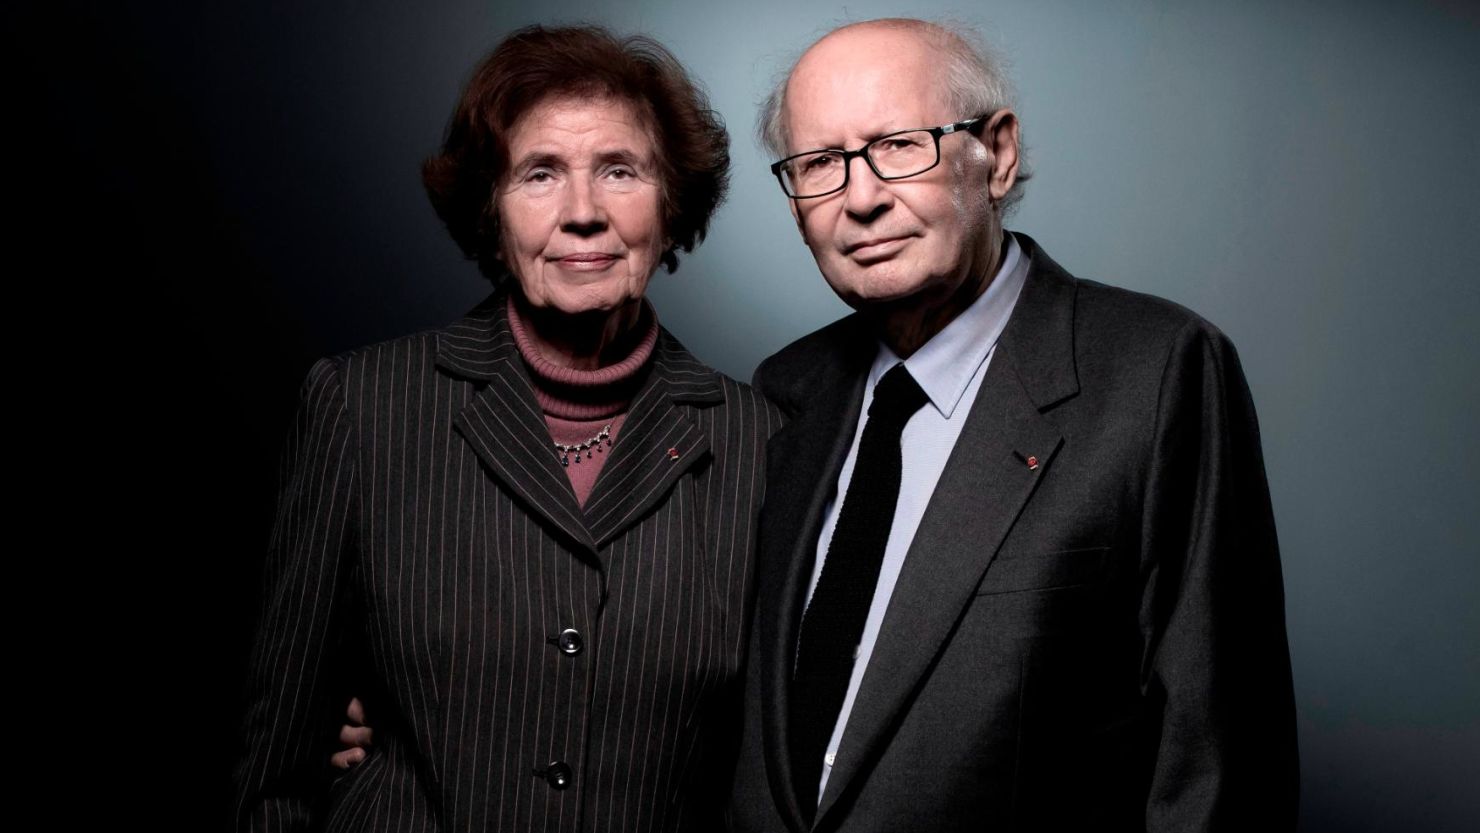 French lawyer and activist Serge Klarsfeld, right, and his wife, French-German journalist and activist Beate Klarsfeld, on November 22, 2017.